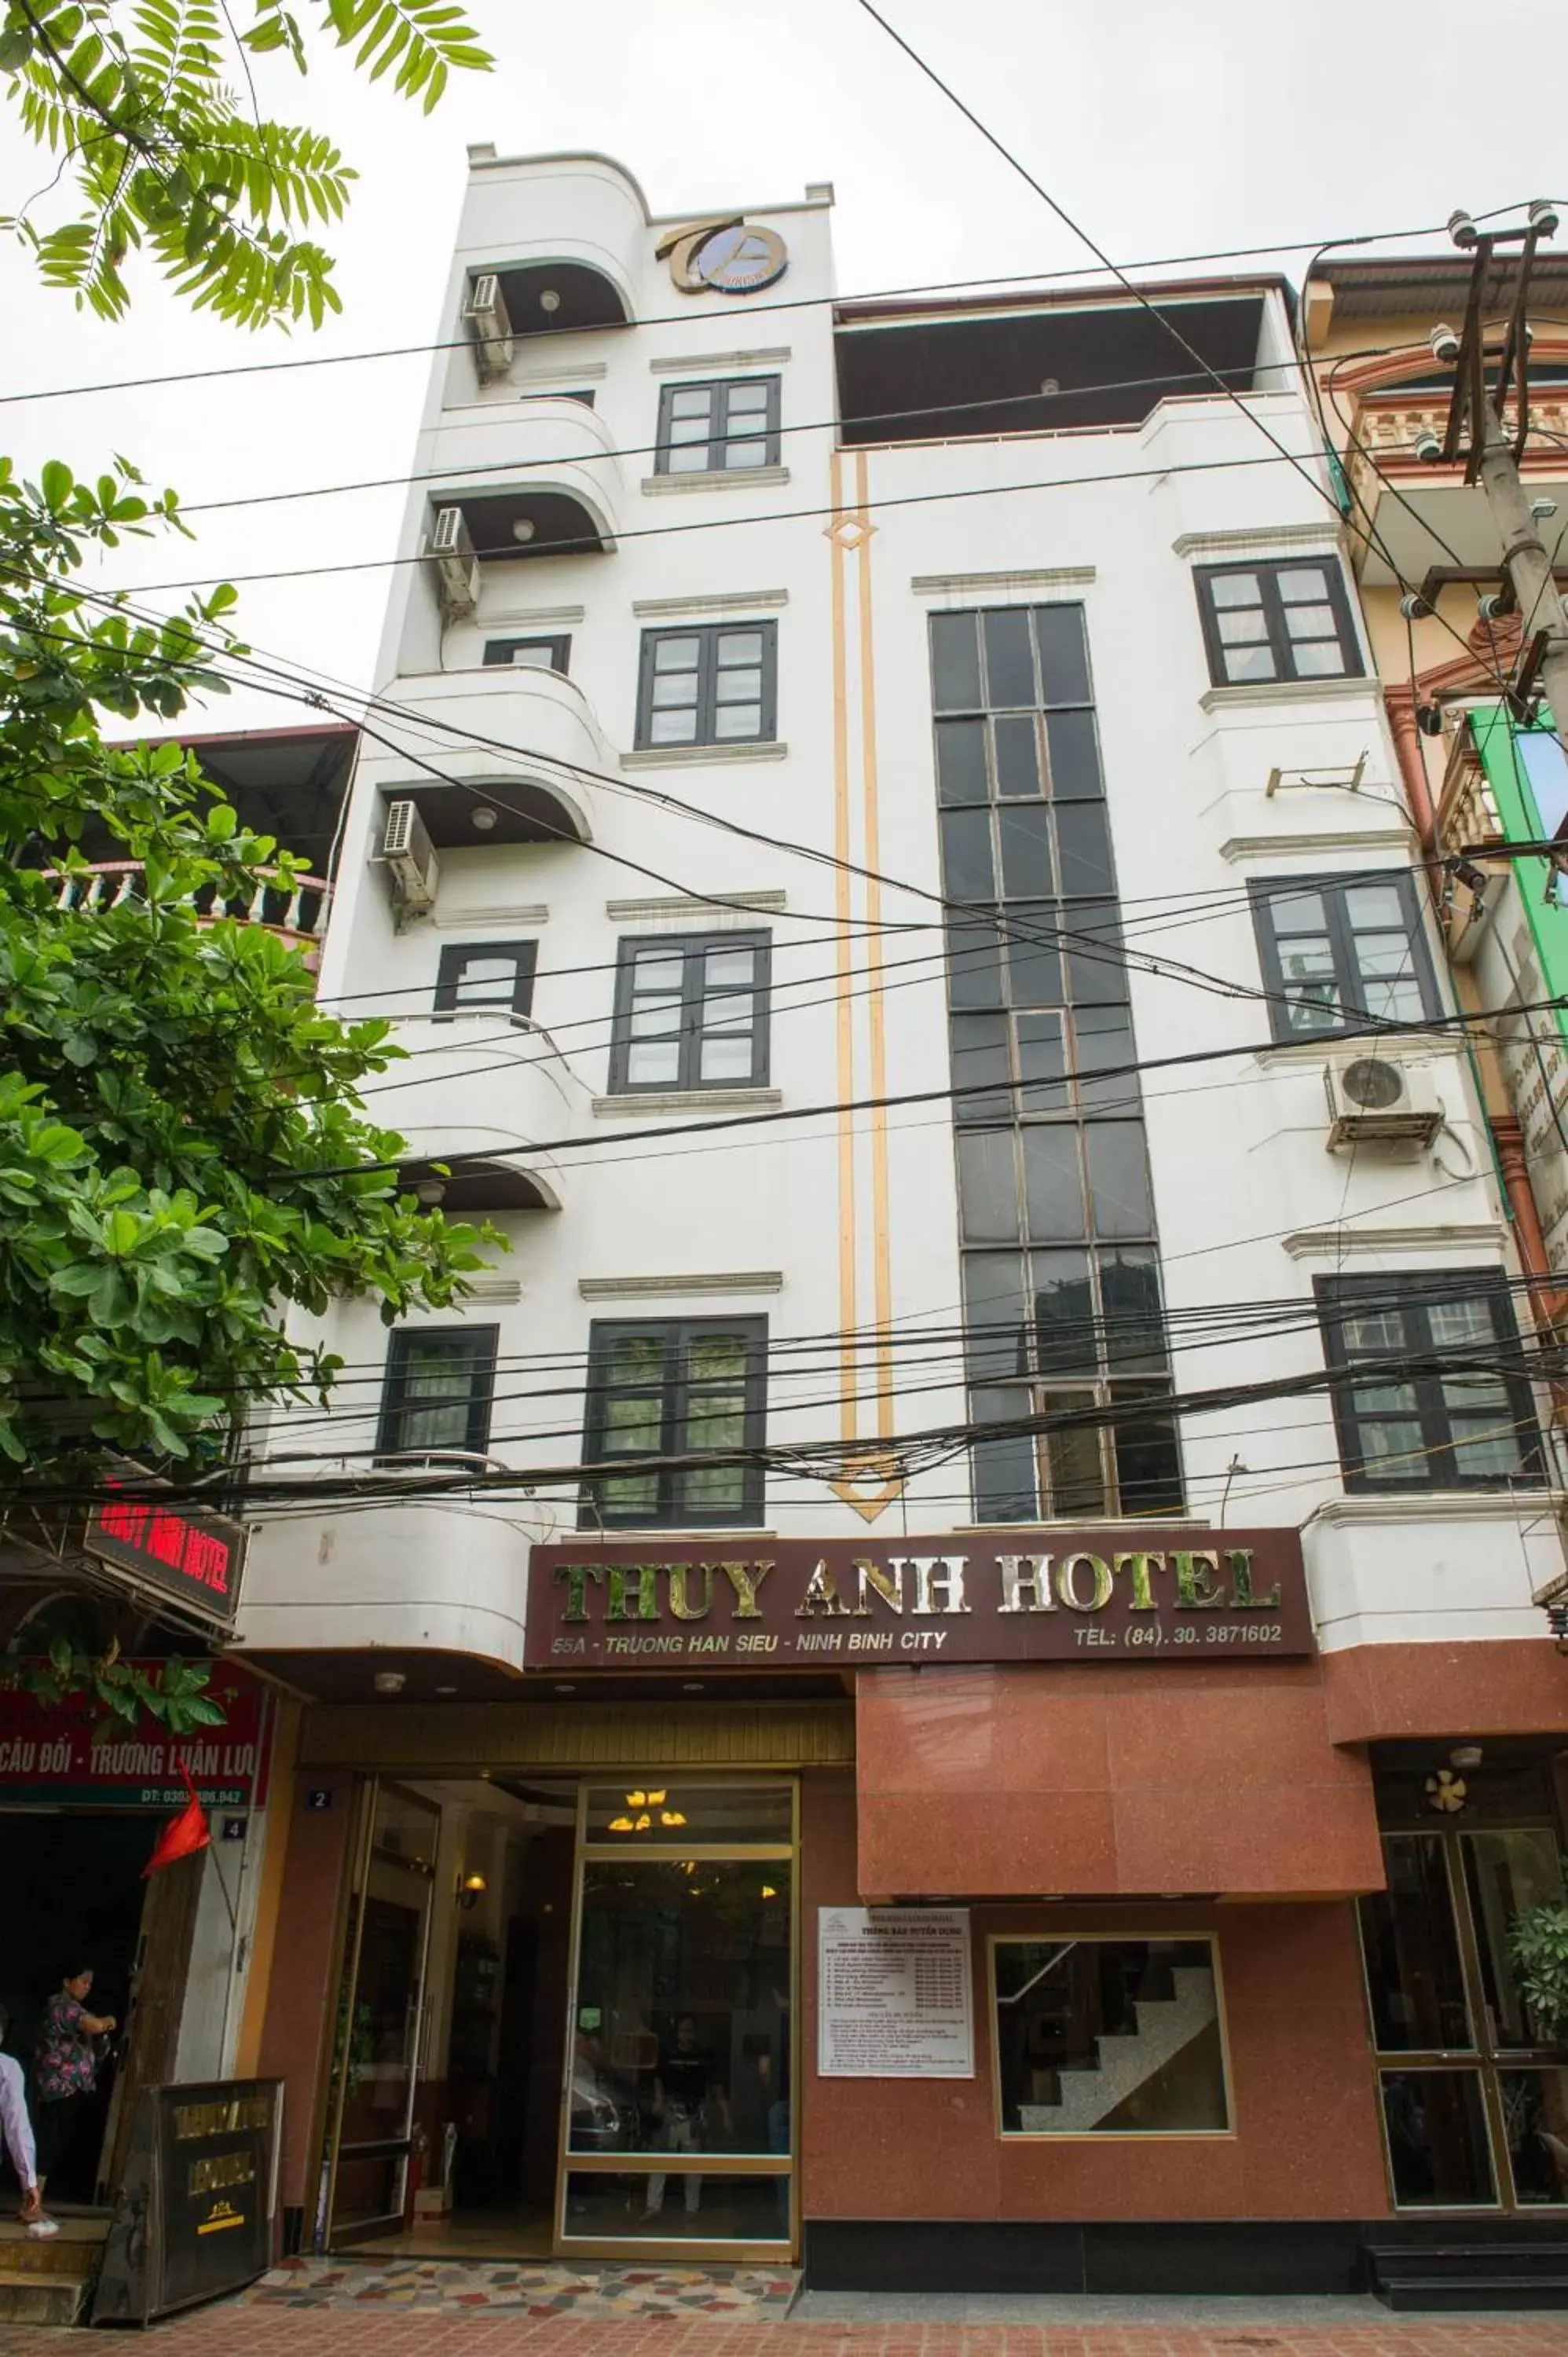 Property Building in Thuy Anh Hotel